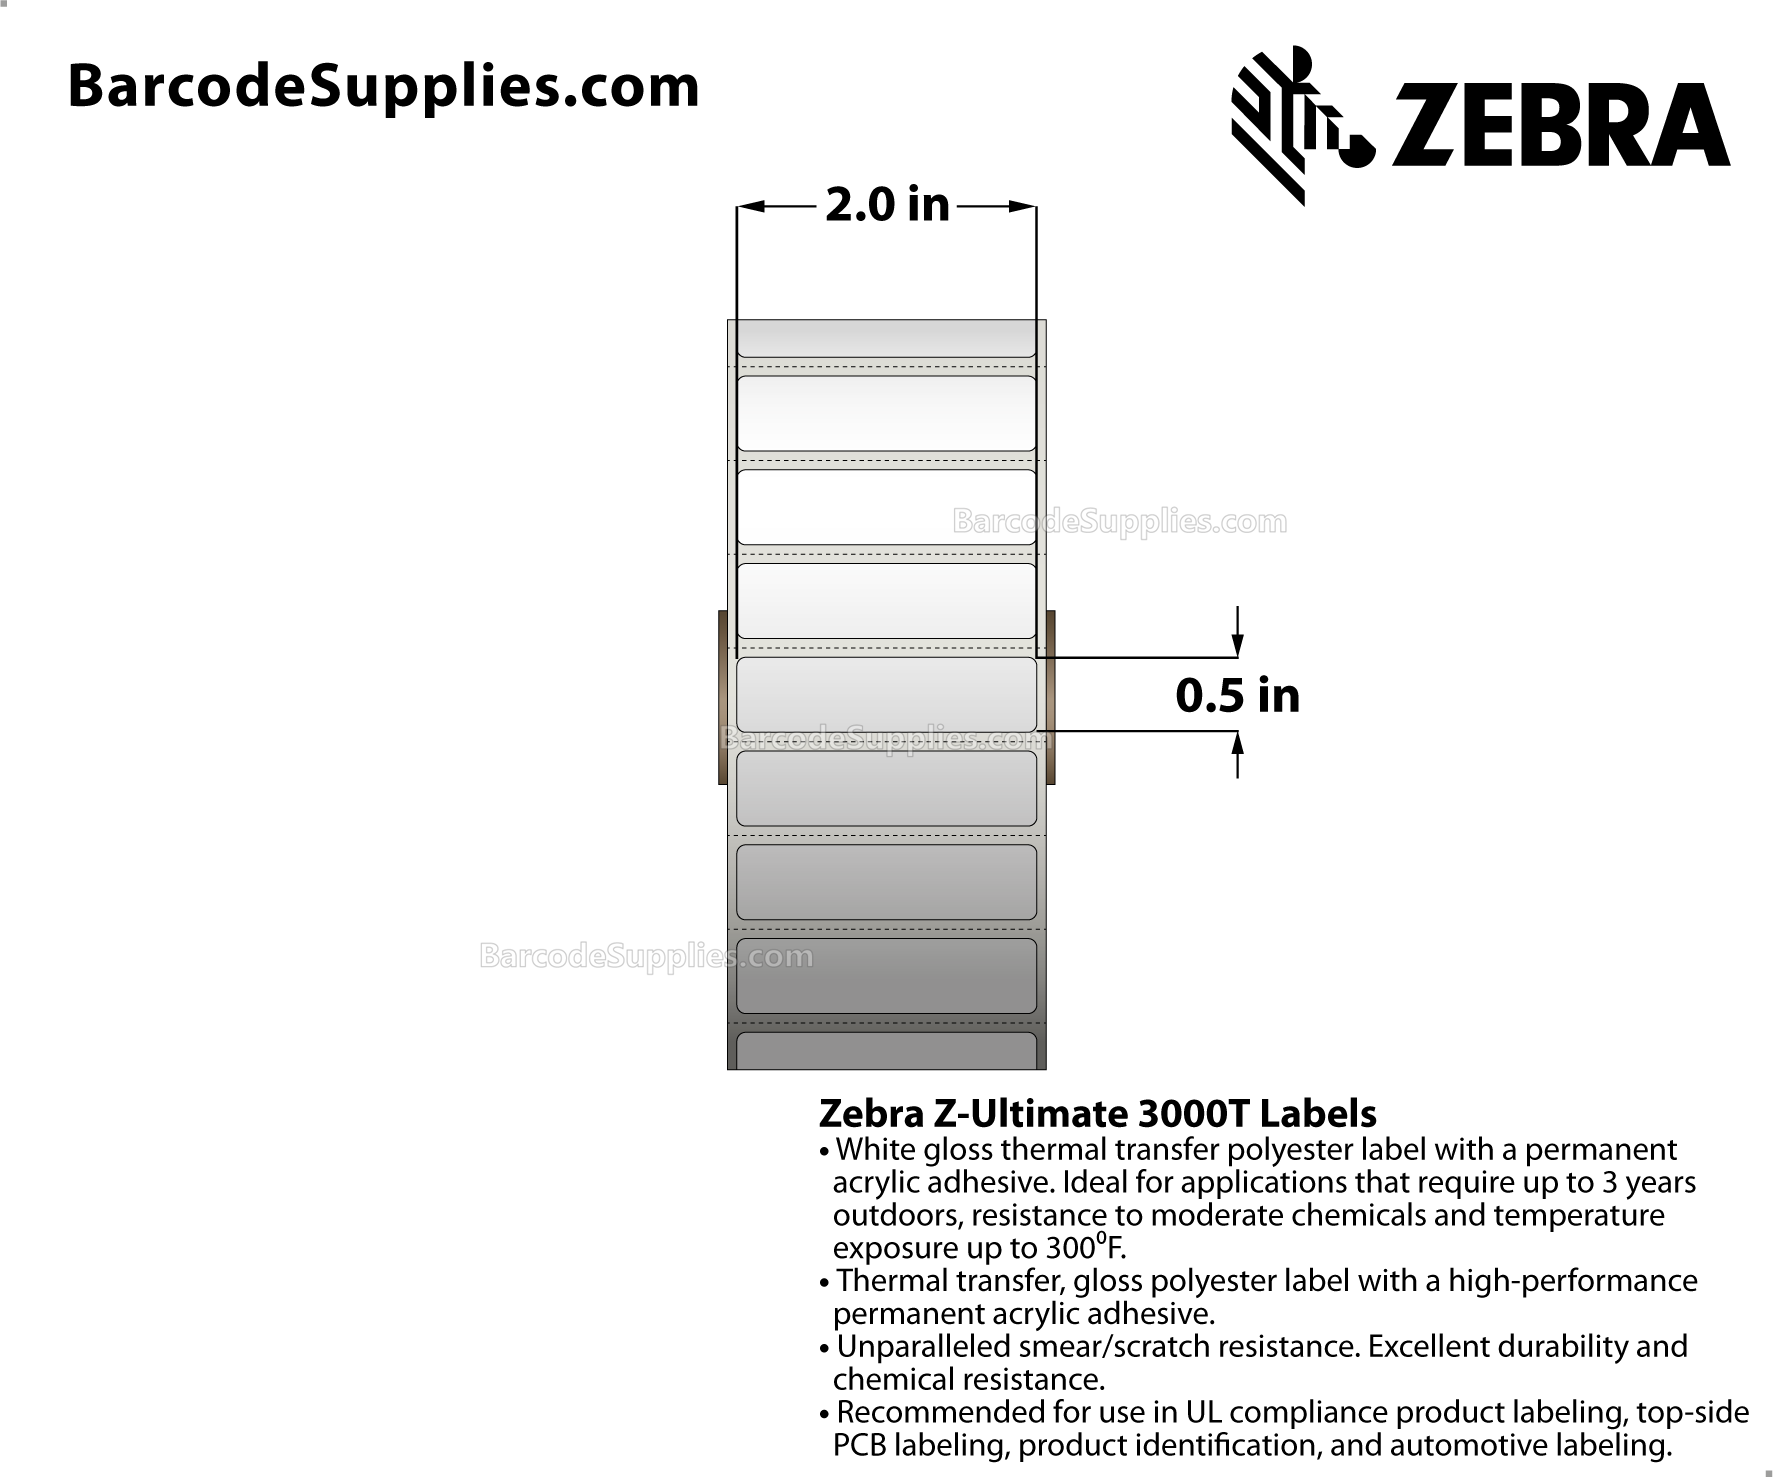 2 x 0.5 Thermal Transfer White Z-Ultimate 3000T Labels With Permanent Adhesive - Perforated - 4550 Labels Per Roll - Carton Of 8 Rolls - 36400 Labels Total - MPN: 18943